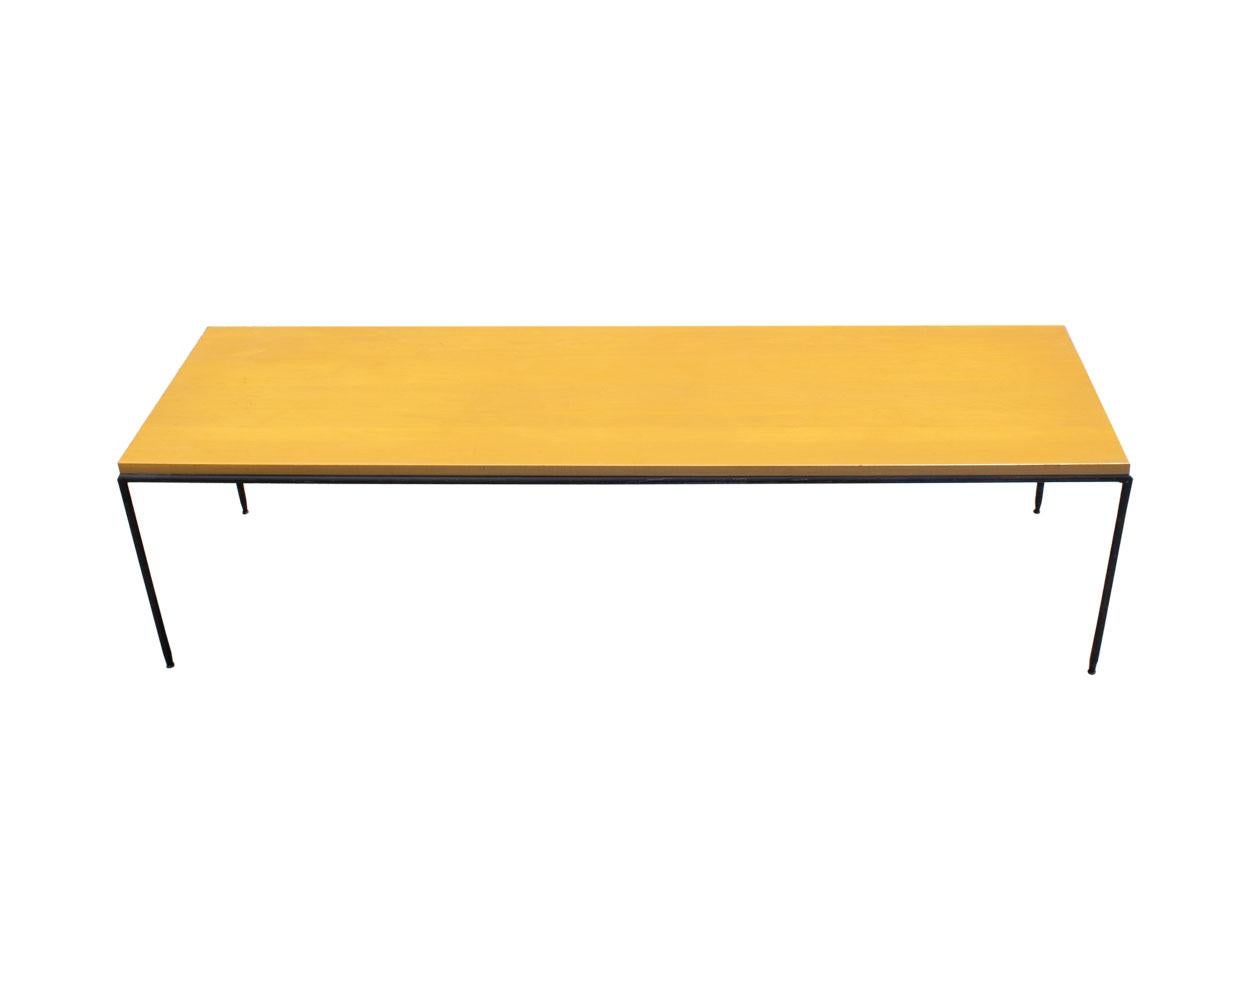 A Planner Group coffee table or bench designed by the American designer Paul McCobb (1917-1969). The table has a light wooden top supported by round iron metal legs. The underside of the table is marked with a Planner Group sticker to the underside.